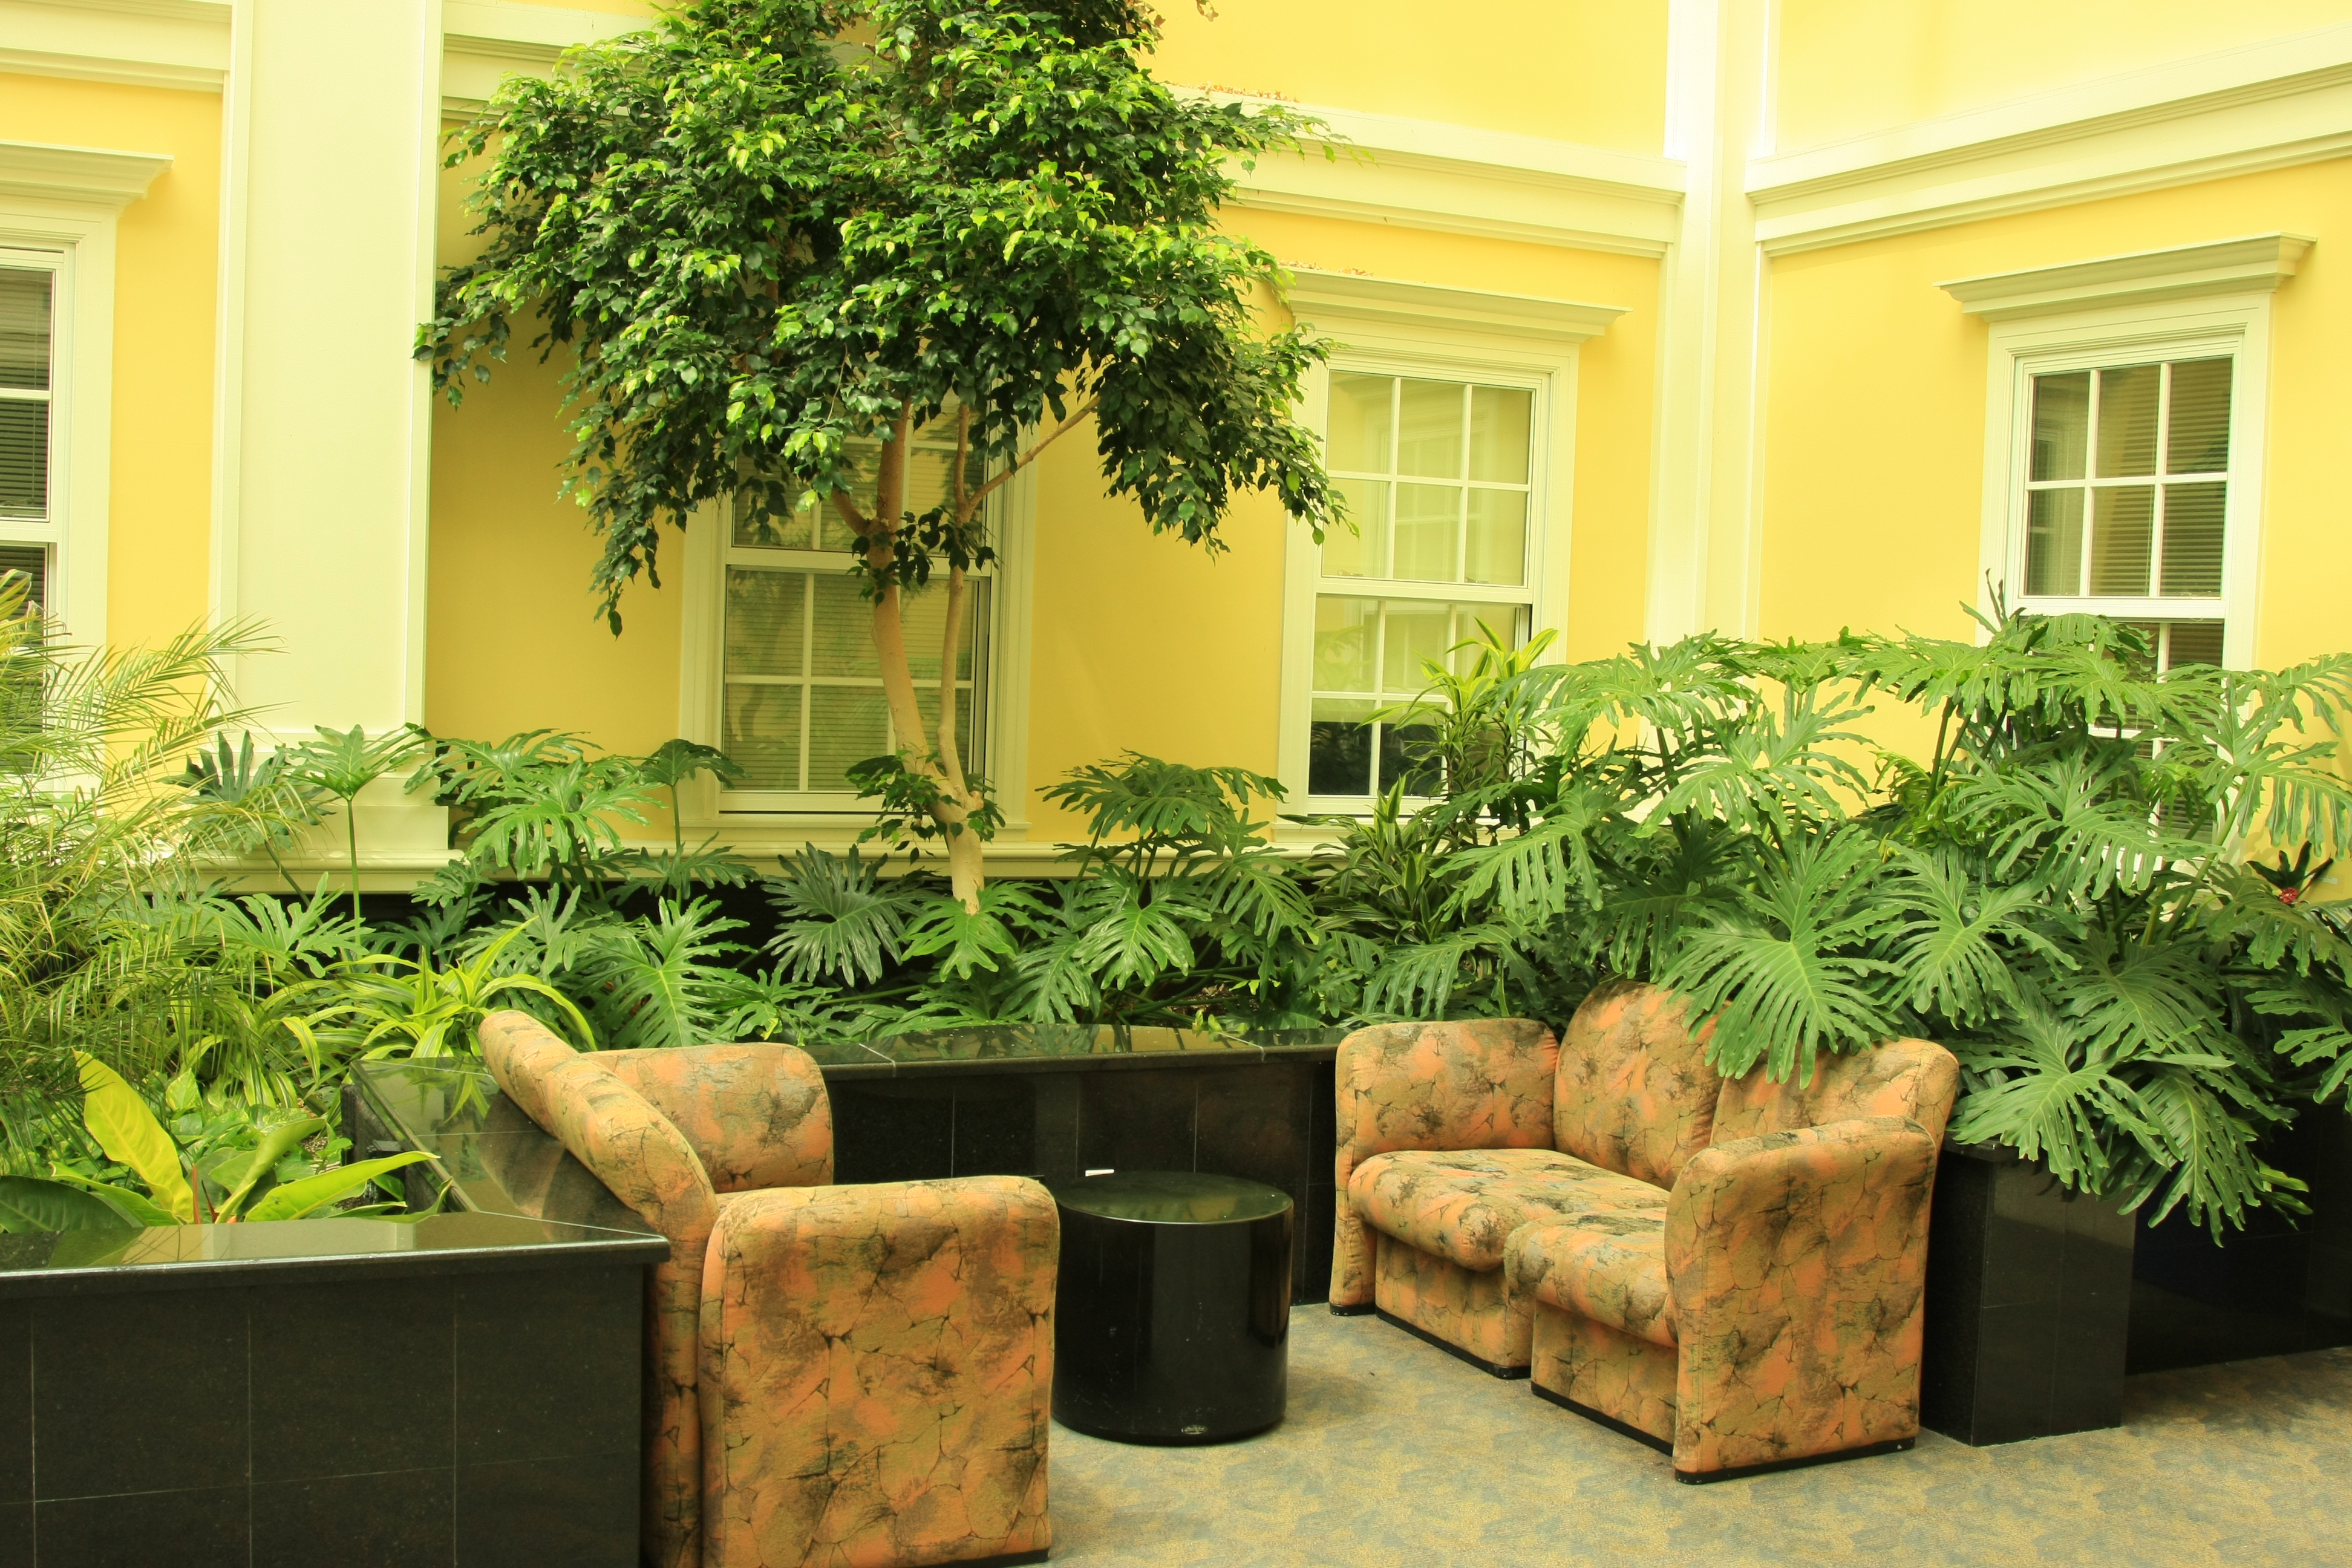 Indoor Plants: “Talking About Turning Your Home Green” | Interior ...